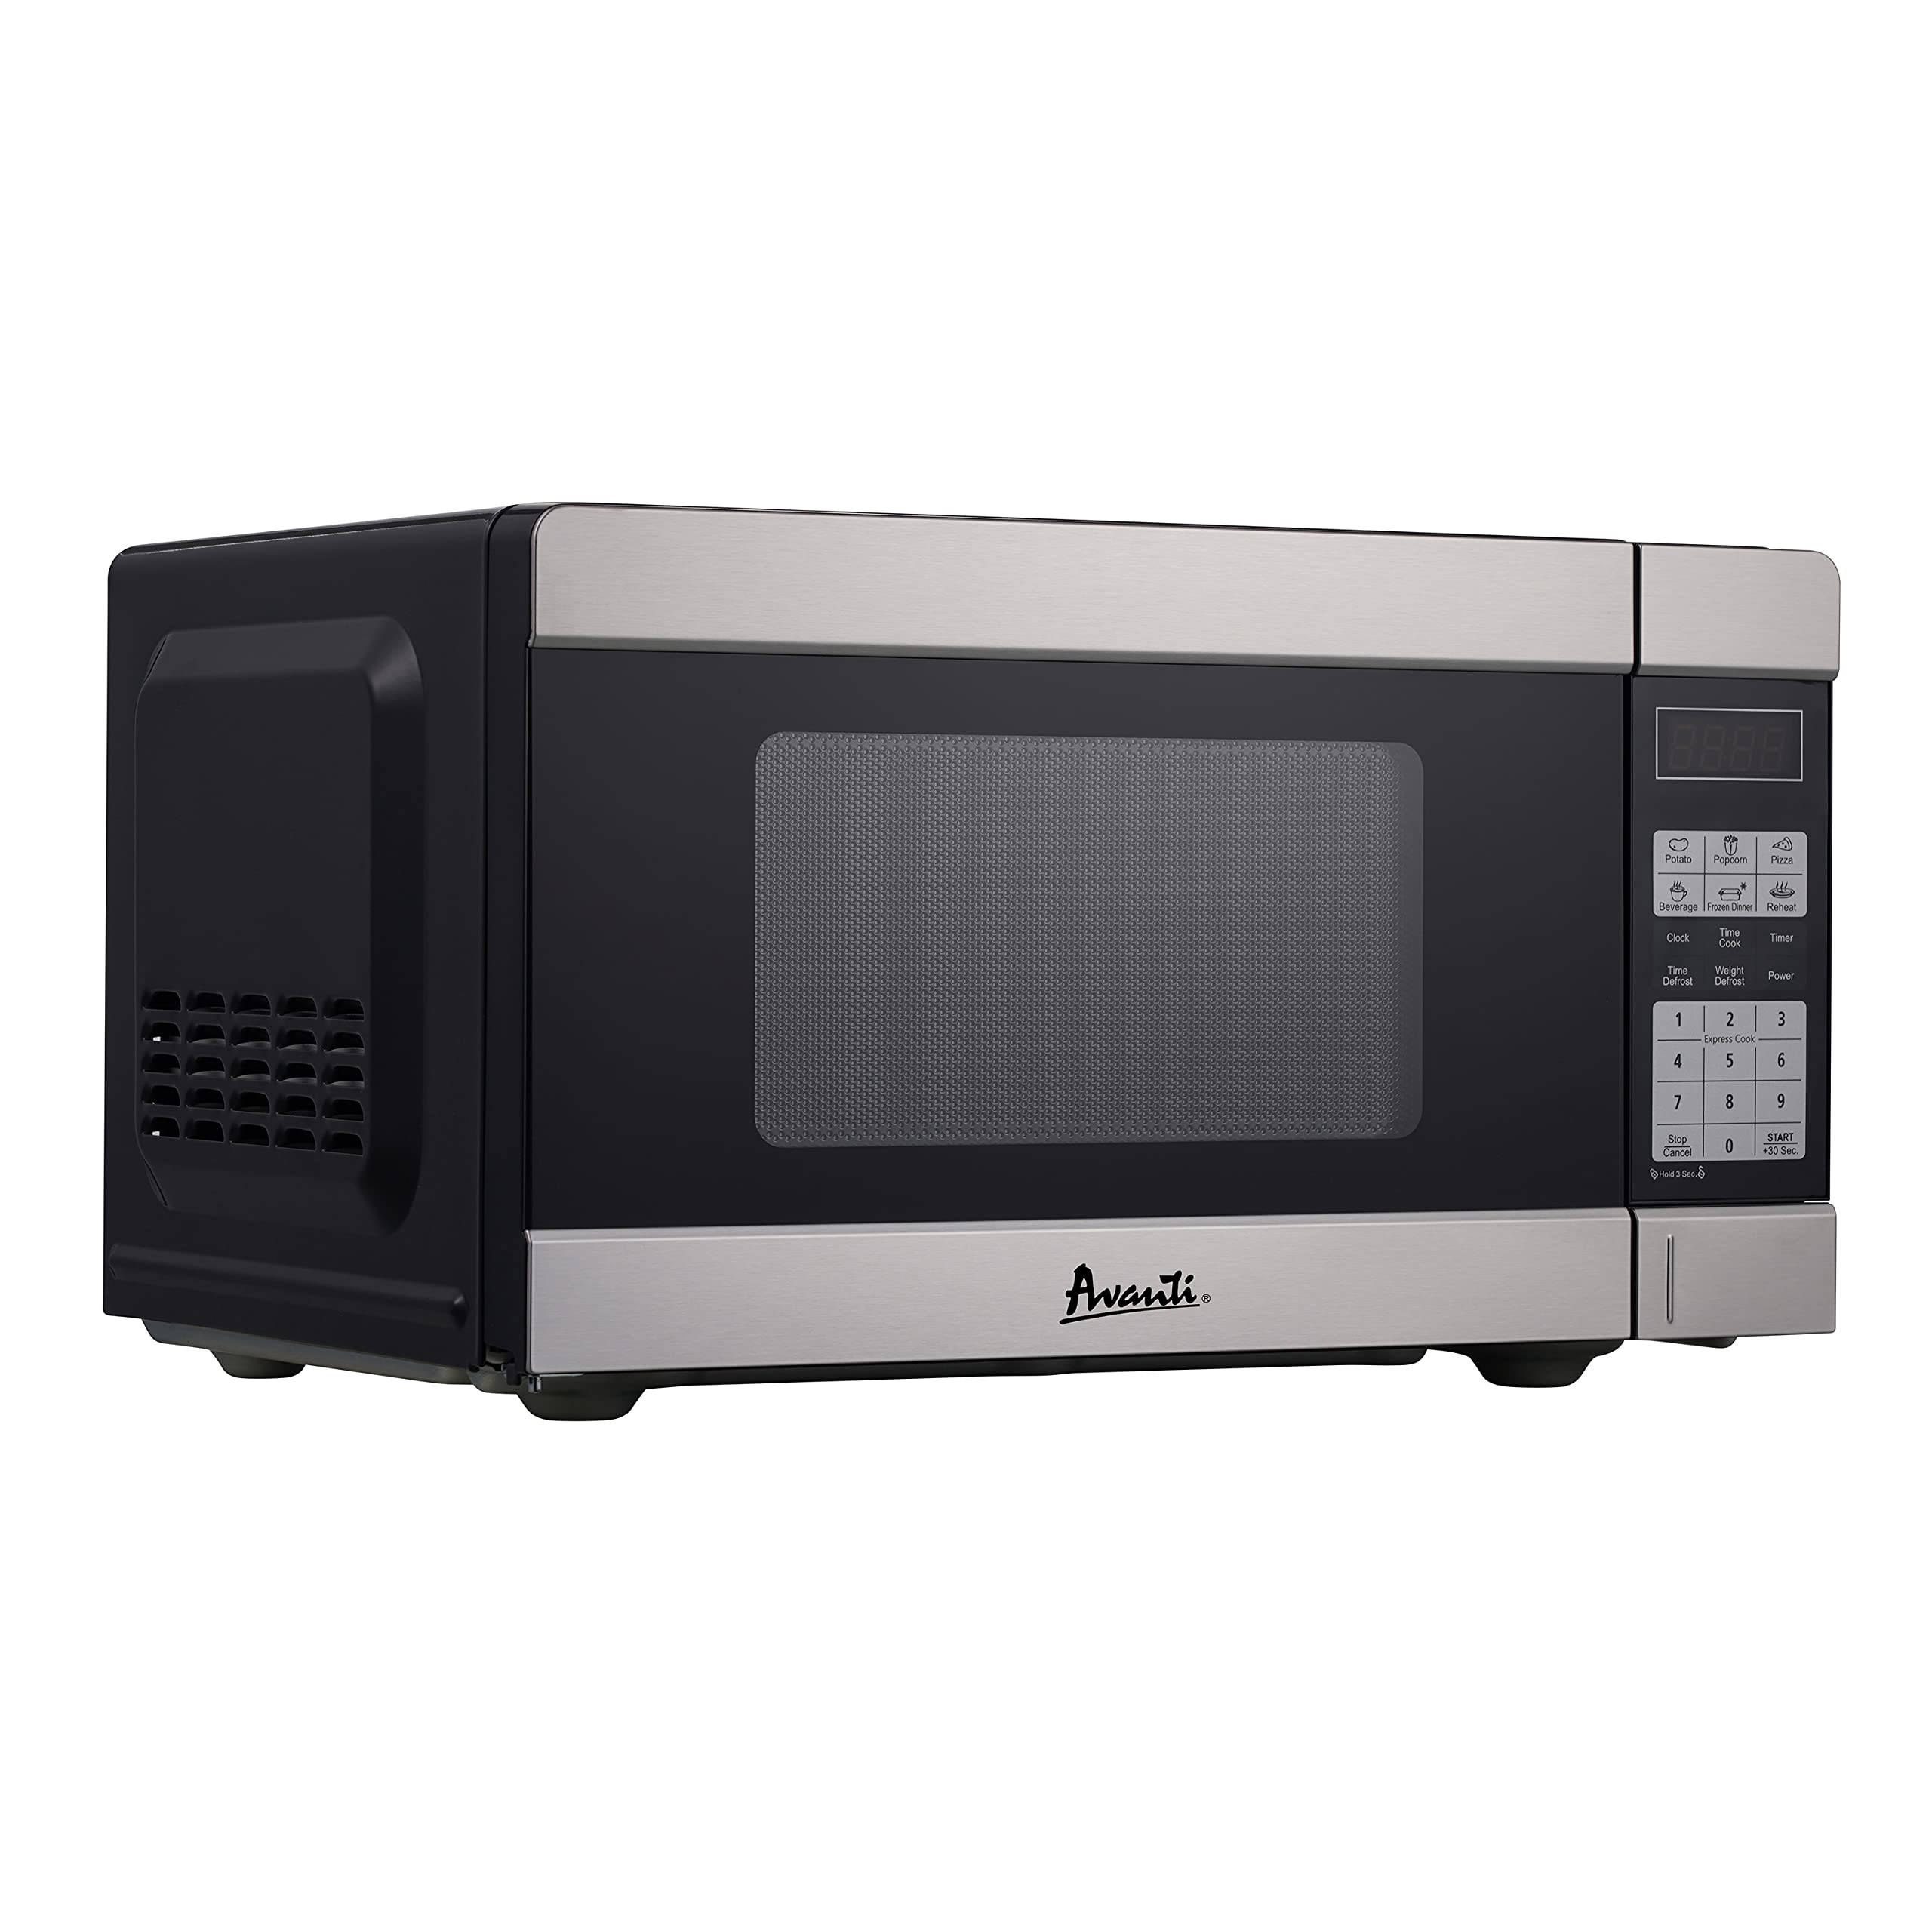 Avanti MT113K3S Microwave Oven 1000-Watts compact with 10 Power Levels and 6 Pre cooking Settings, Speed Defrost, Electronic con